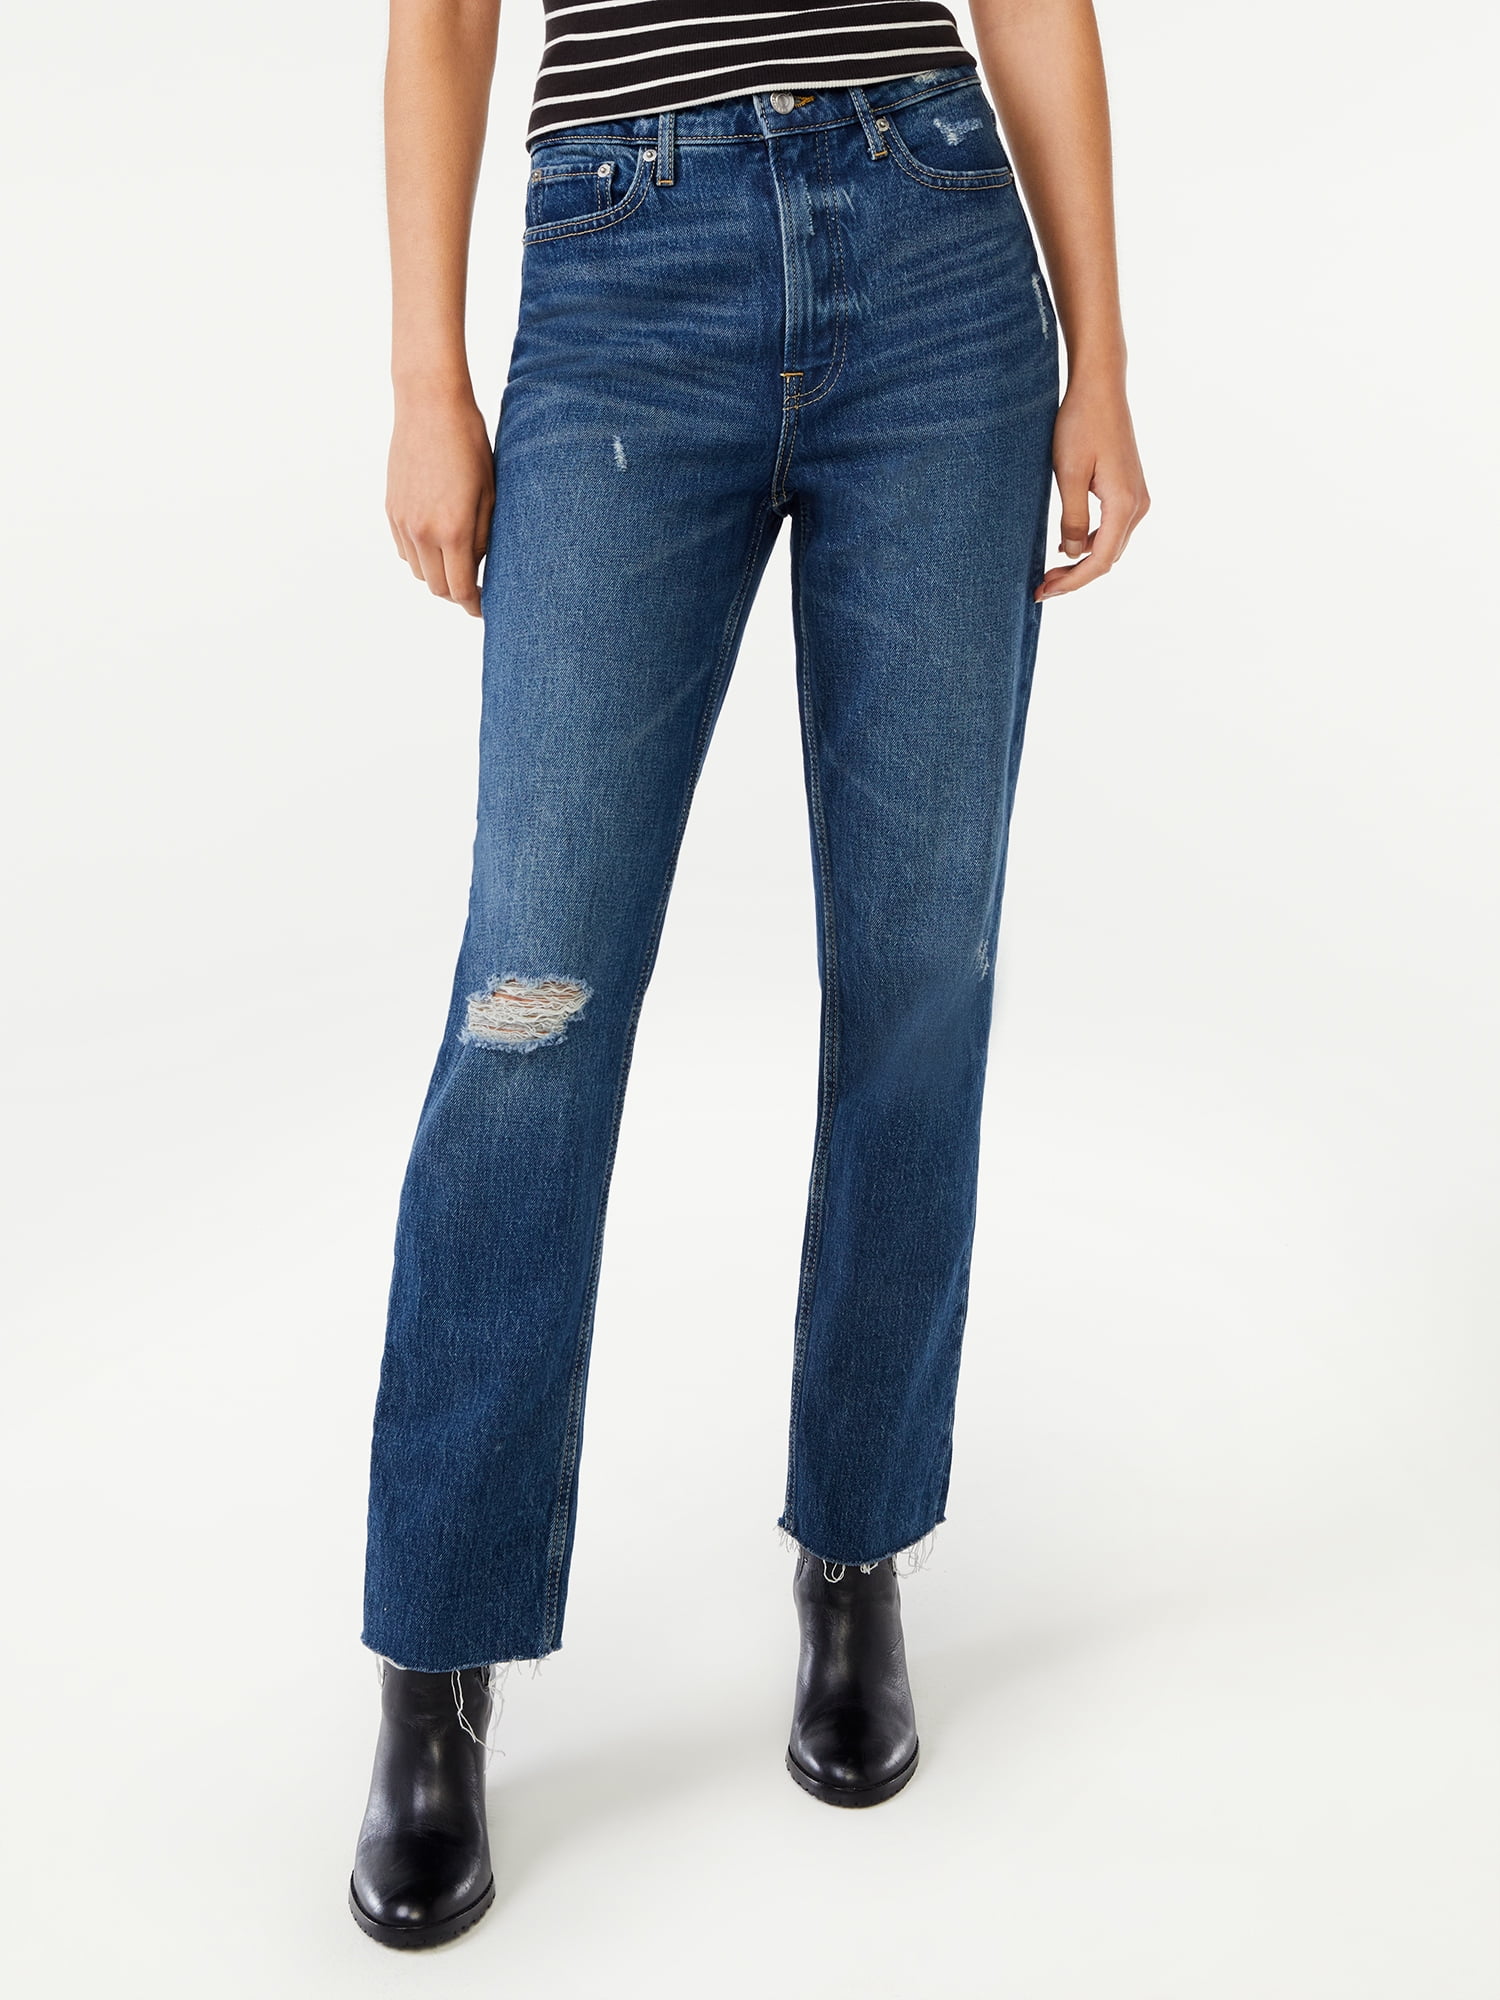 Free Assembly Women's Super High Rise Straight Jeans - Walmart.com